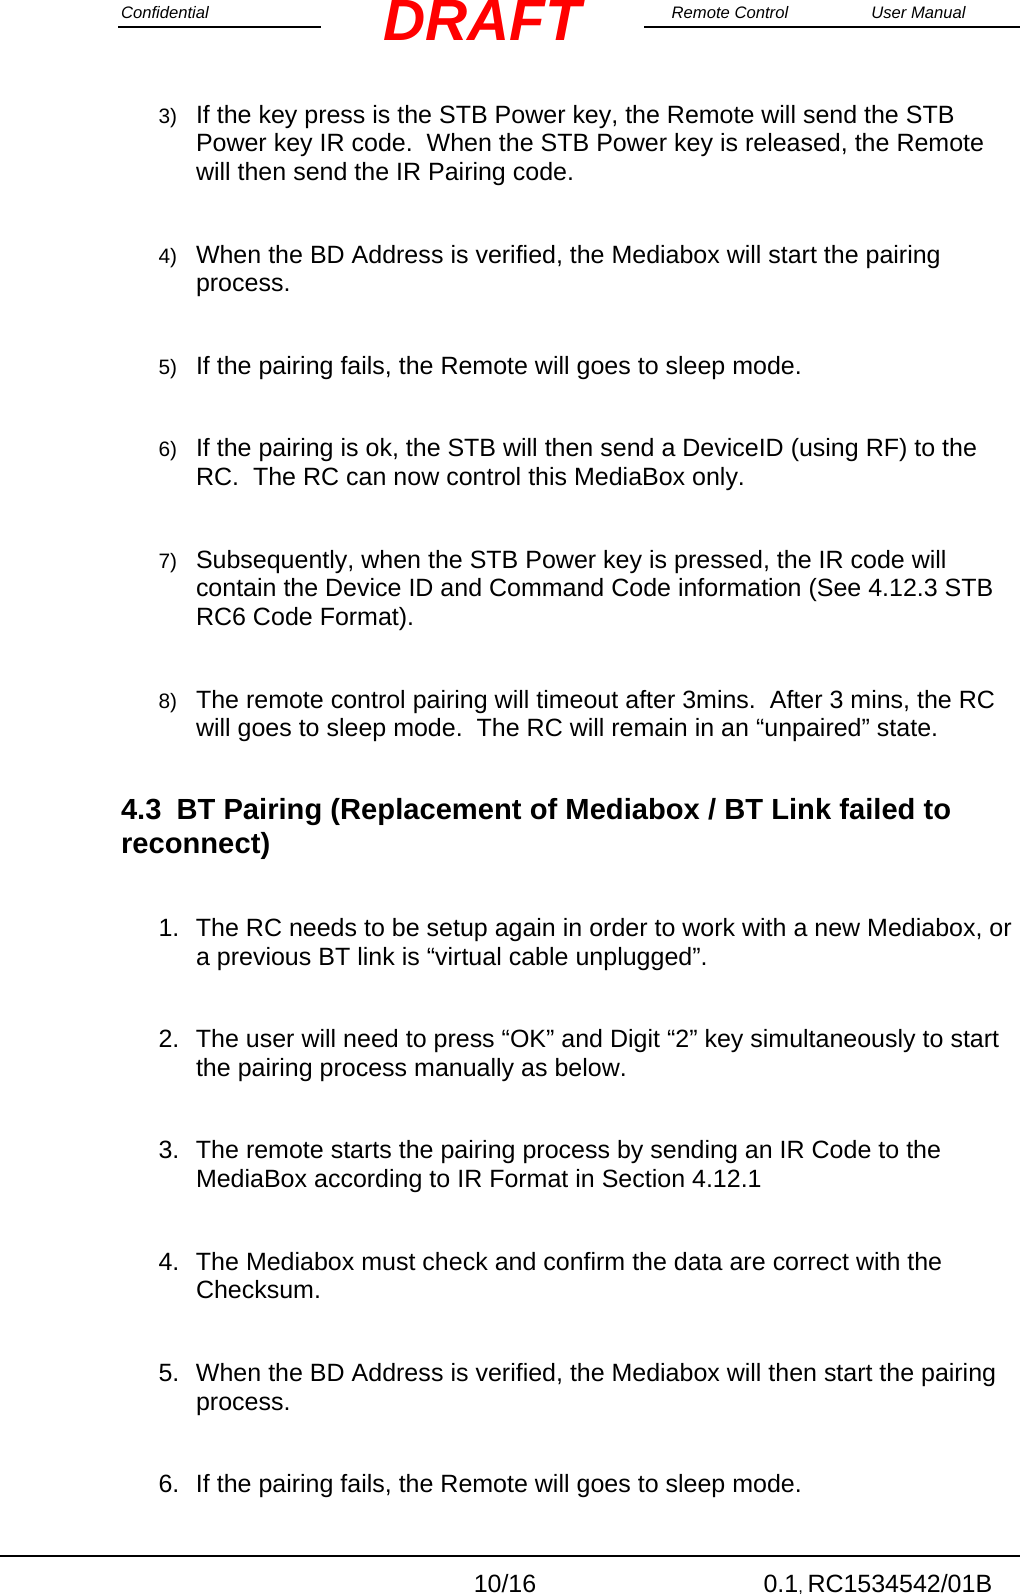 Confidential                                                                                                    Remote Control  User Manual  10/16 0.1, RC1534542/01B DRAFT3)  If the key press is the STB Power key, the Remote will send the STB Power key IR code.  When the STB Power key is released, the Remote will then send the IR Pairing code.  4)  When the BD Address is verified, the Mediabox will start the pairing process.  5)  If the pairing fails, the Remote will goes to sleep mode.  6)  If the pairing is ok, the STB will then send a DeviceID (using RF) to the RC.  The RC can now control this MediaBox only.  7)  Subsequently, when the STB Power key is pressed, the IR code will contain the Device ID and Command Code information (See 4.12.3 STB RC6 Code Format).    8)  The remote control pairing will timeout after 3mins.  After 3 mins, the RC will goes to sleep mode.  The RC will remain in an “unpaired” state. 4.3  BT Pairing (Replacement of Mediabox / BT Link failed to reconnect)  1.  The RC needs to be setup again in order to work with a new Mediabox, or a previous BT link is “virtual cable unplugged”.  2.  The user will need to press “OK” and Digit “2” key simultaneously to start the pairing process manually as below.  3.  The remote starts the pairing process by sending an IR Code to the MediaBox according to IR Format in Section 4.12.1  4.  The Mediabox must check and confirm the data are correct with the Checksum.  5.  When the BD Address is verified, the Mediabox will then start the pairing process.    6.  If the pairing fails, the Remote will goes to sleep mode. 